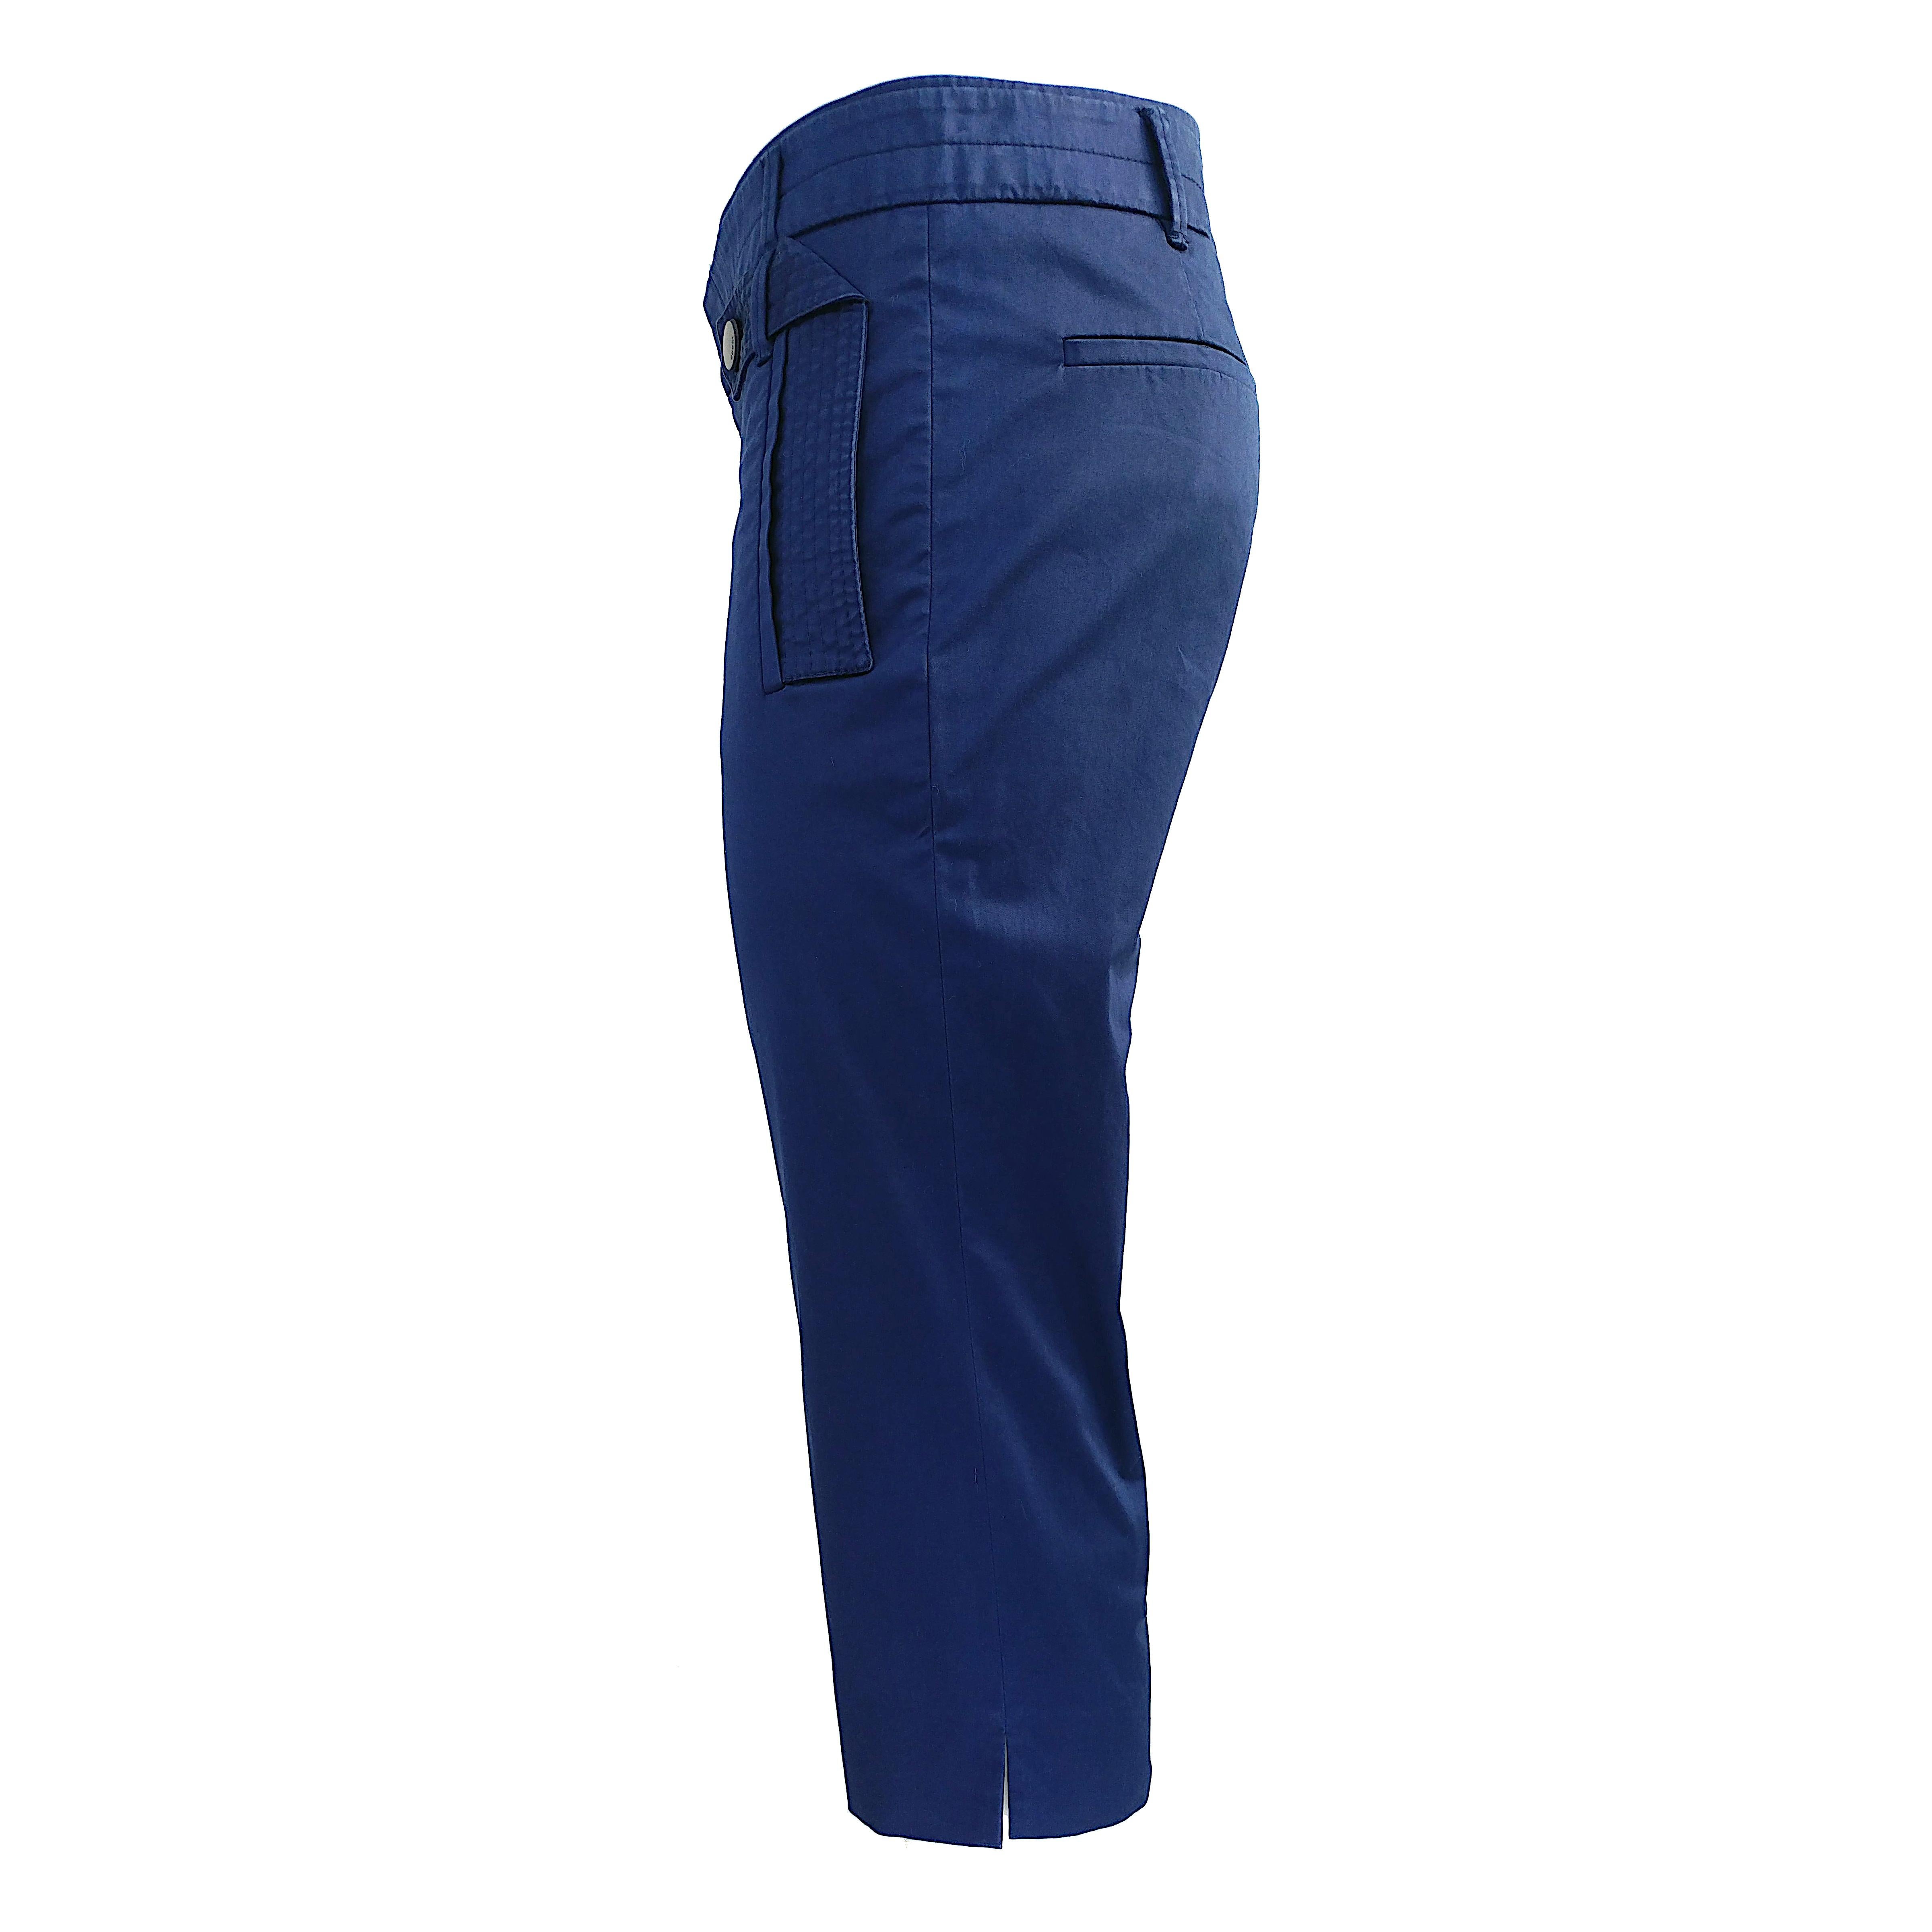 Introducing these Gucci Capri pants, a stylish blend of comfort and sophistication. Crafted from stretch cotton fabric in a vibrant cobalt blue hue, these 3/4 length Capris are a chic addition to your wardrobe. The stretch fabric ensures a